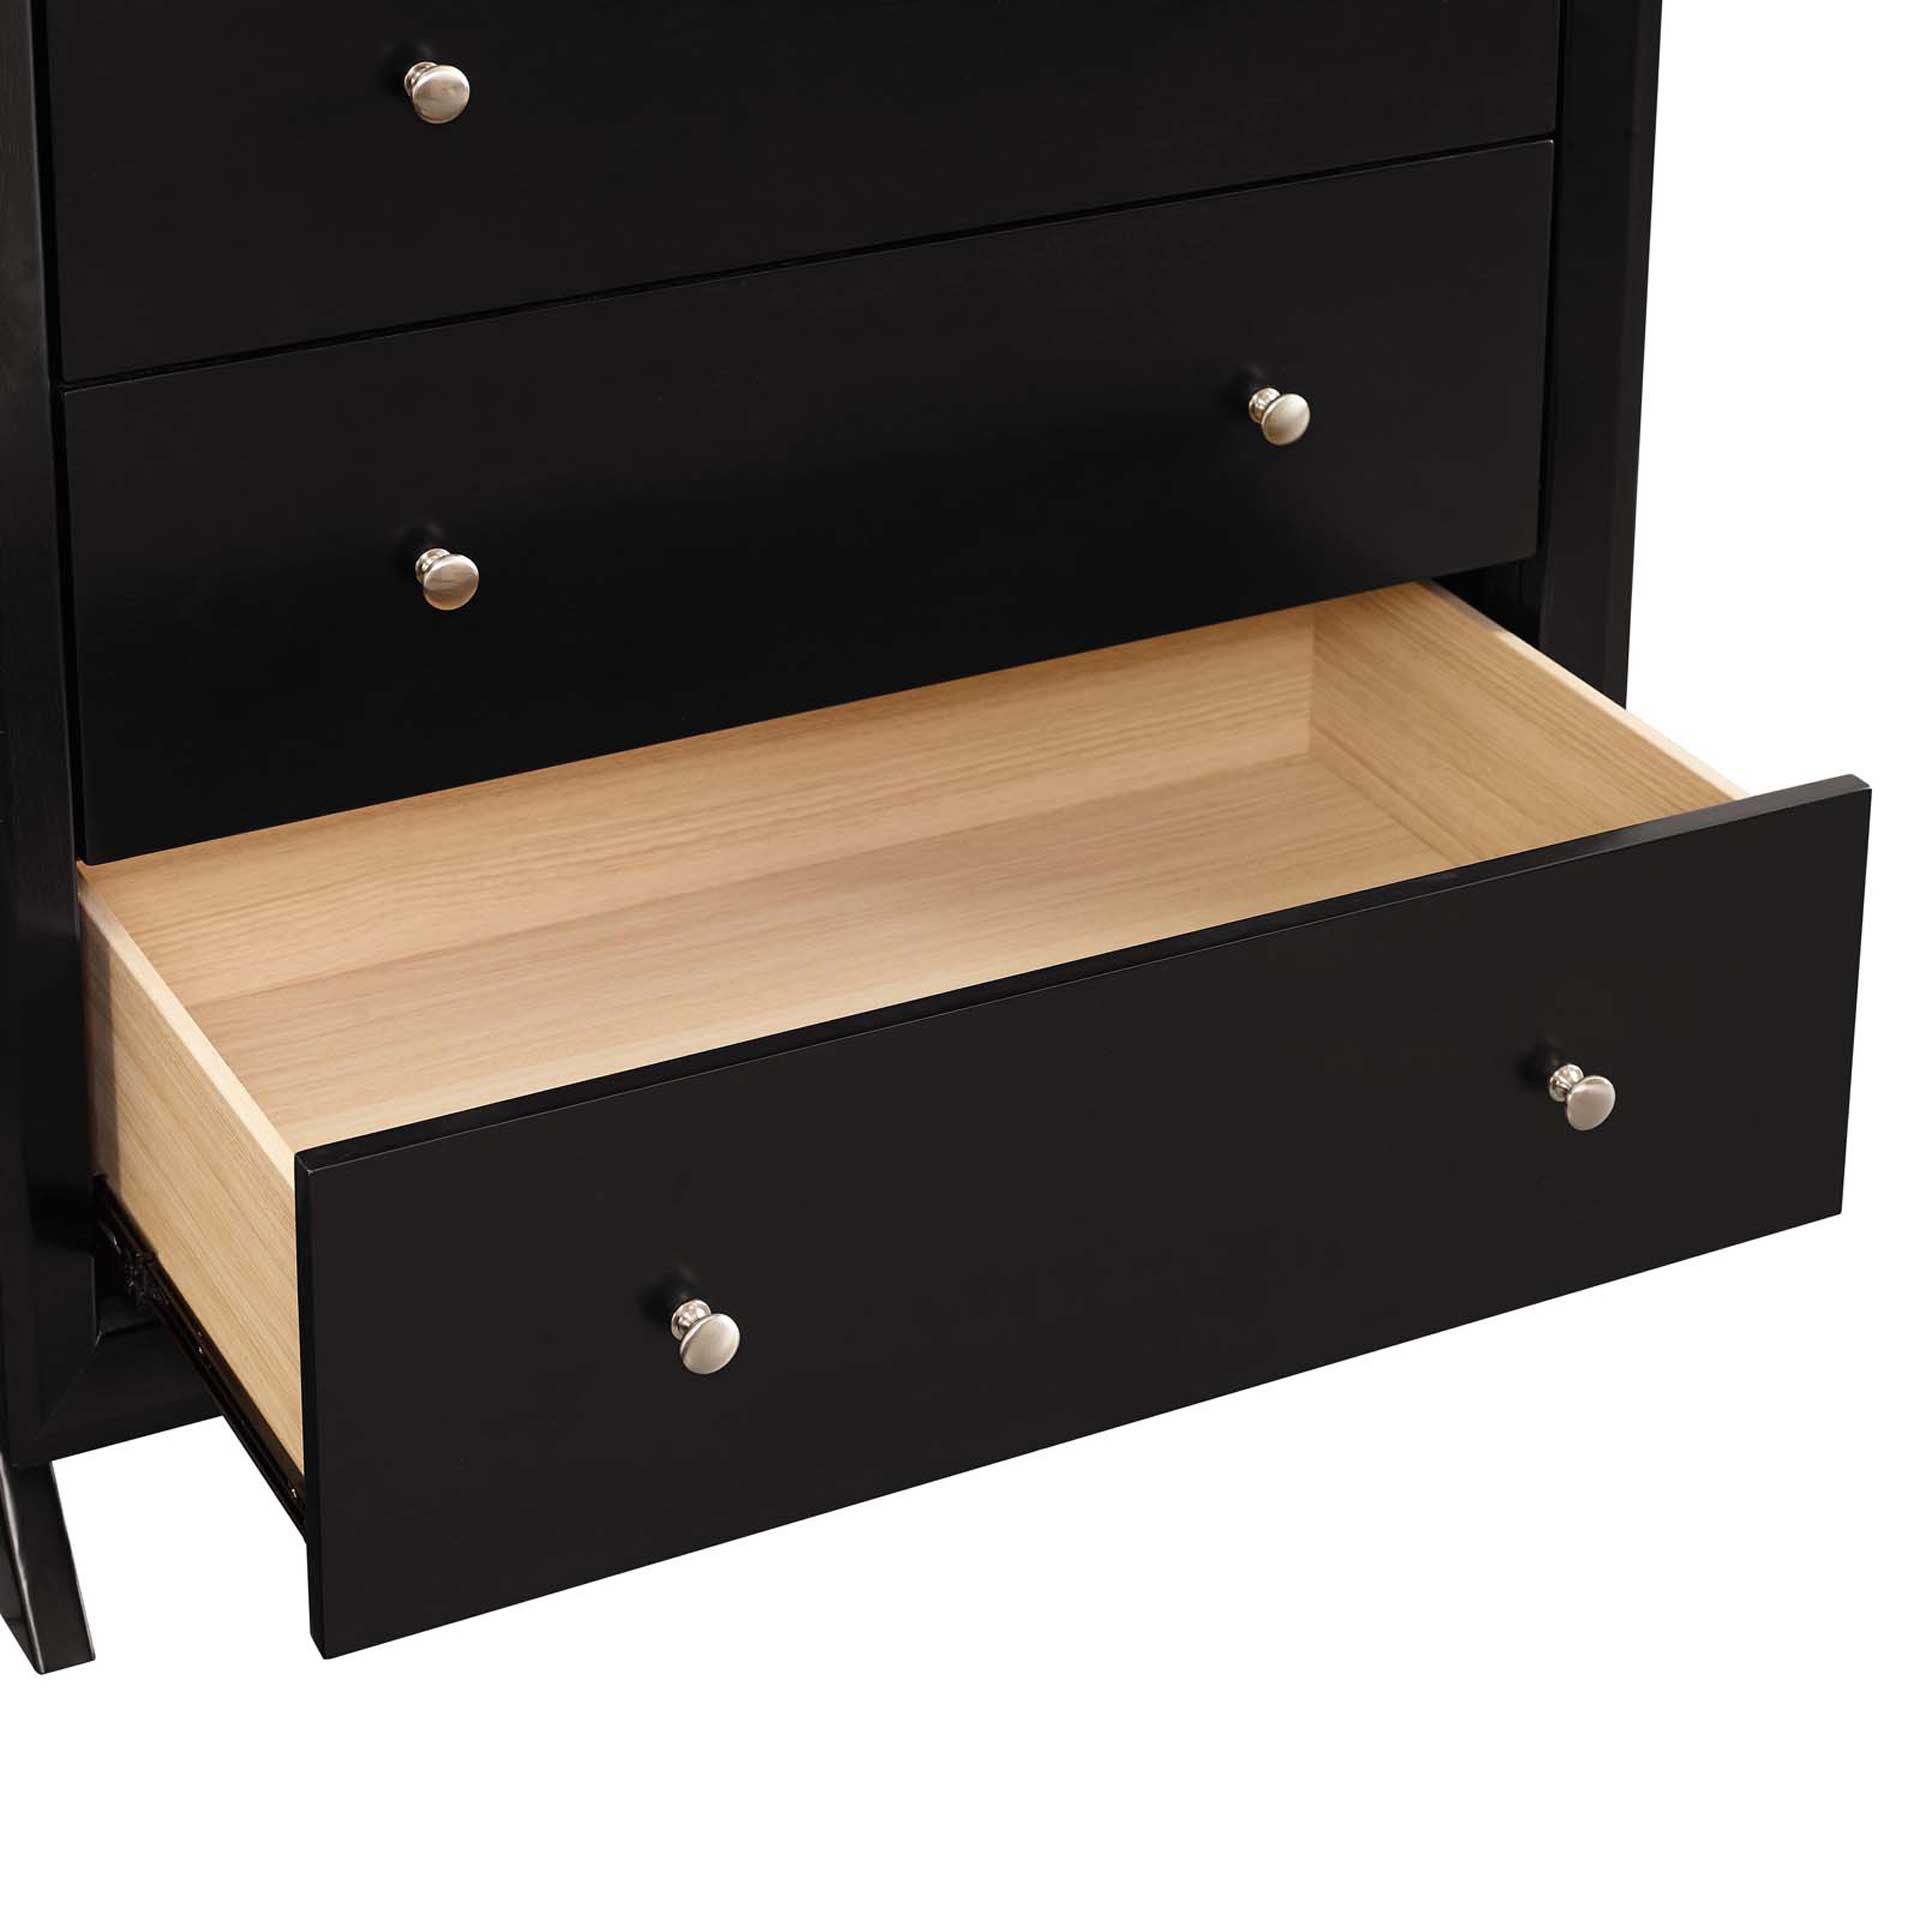 Parker Five-Drawer Chest Cappuccino